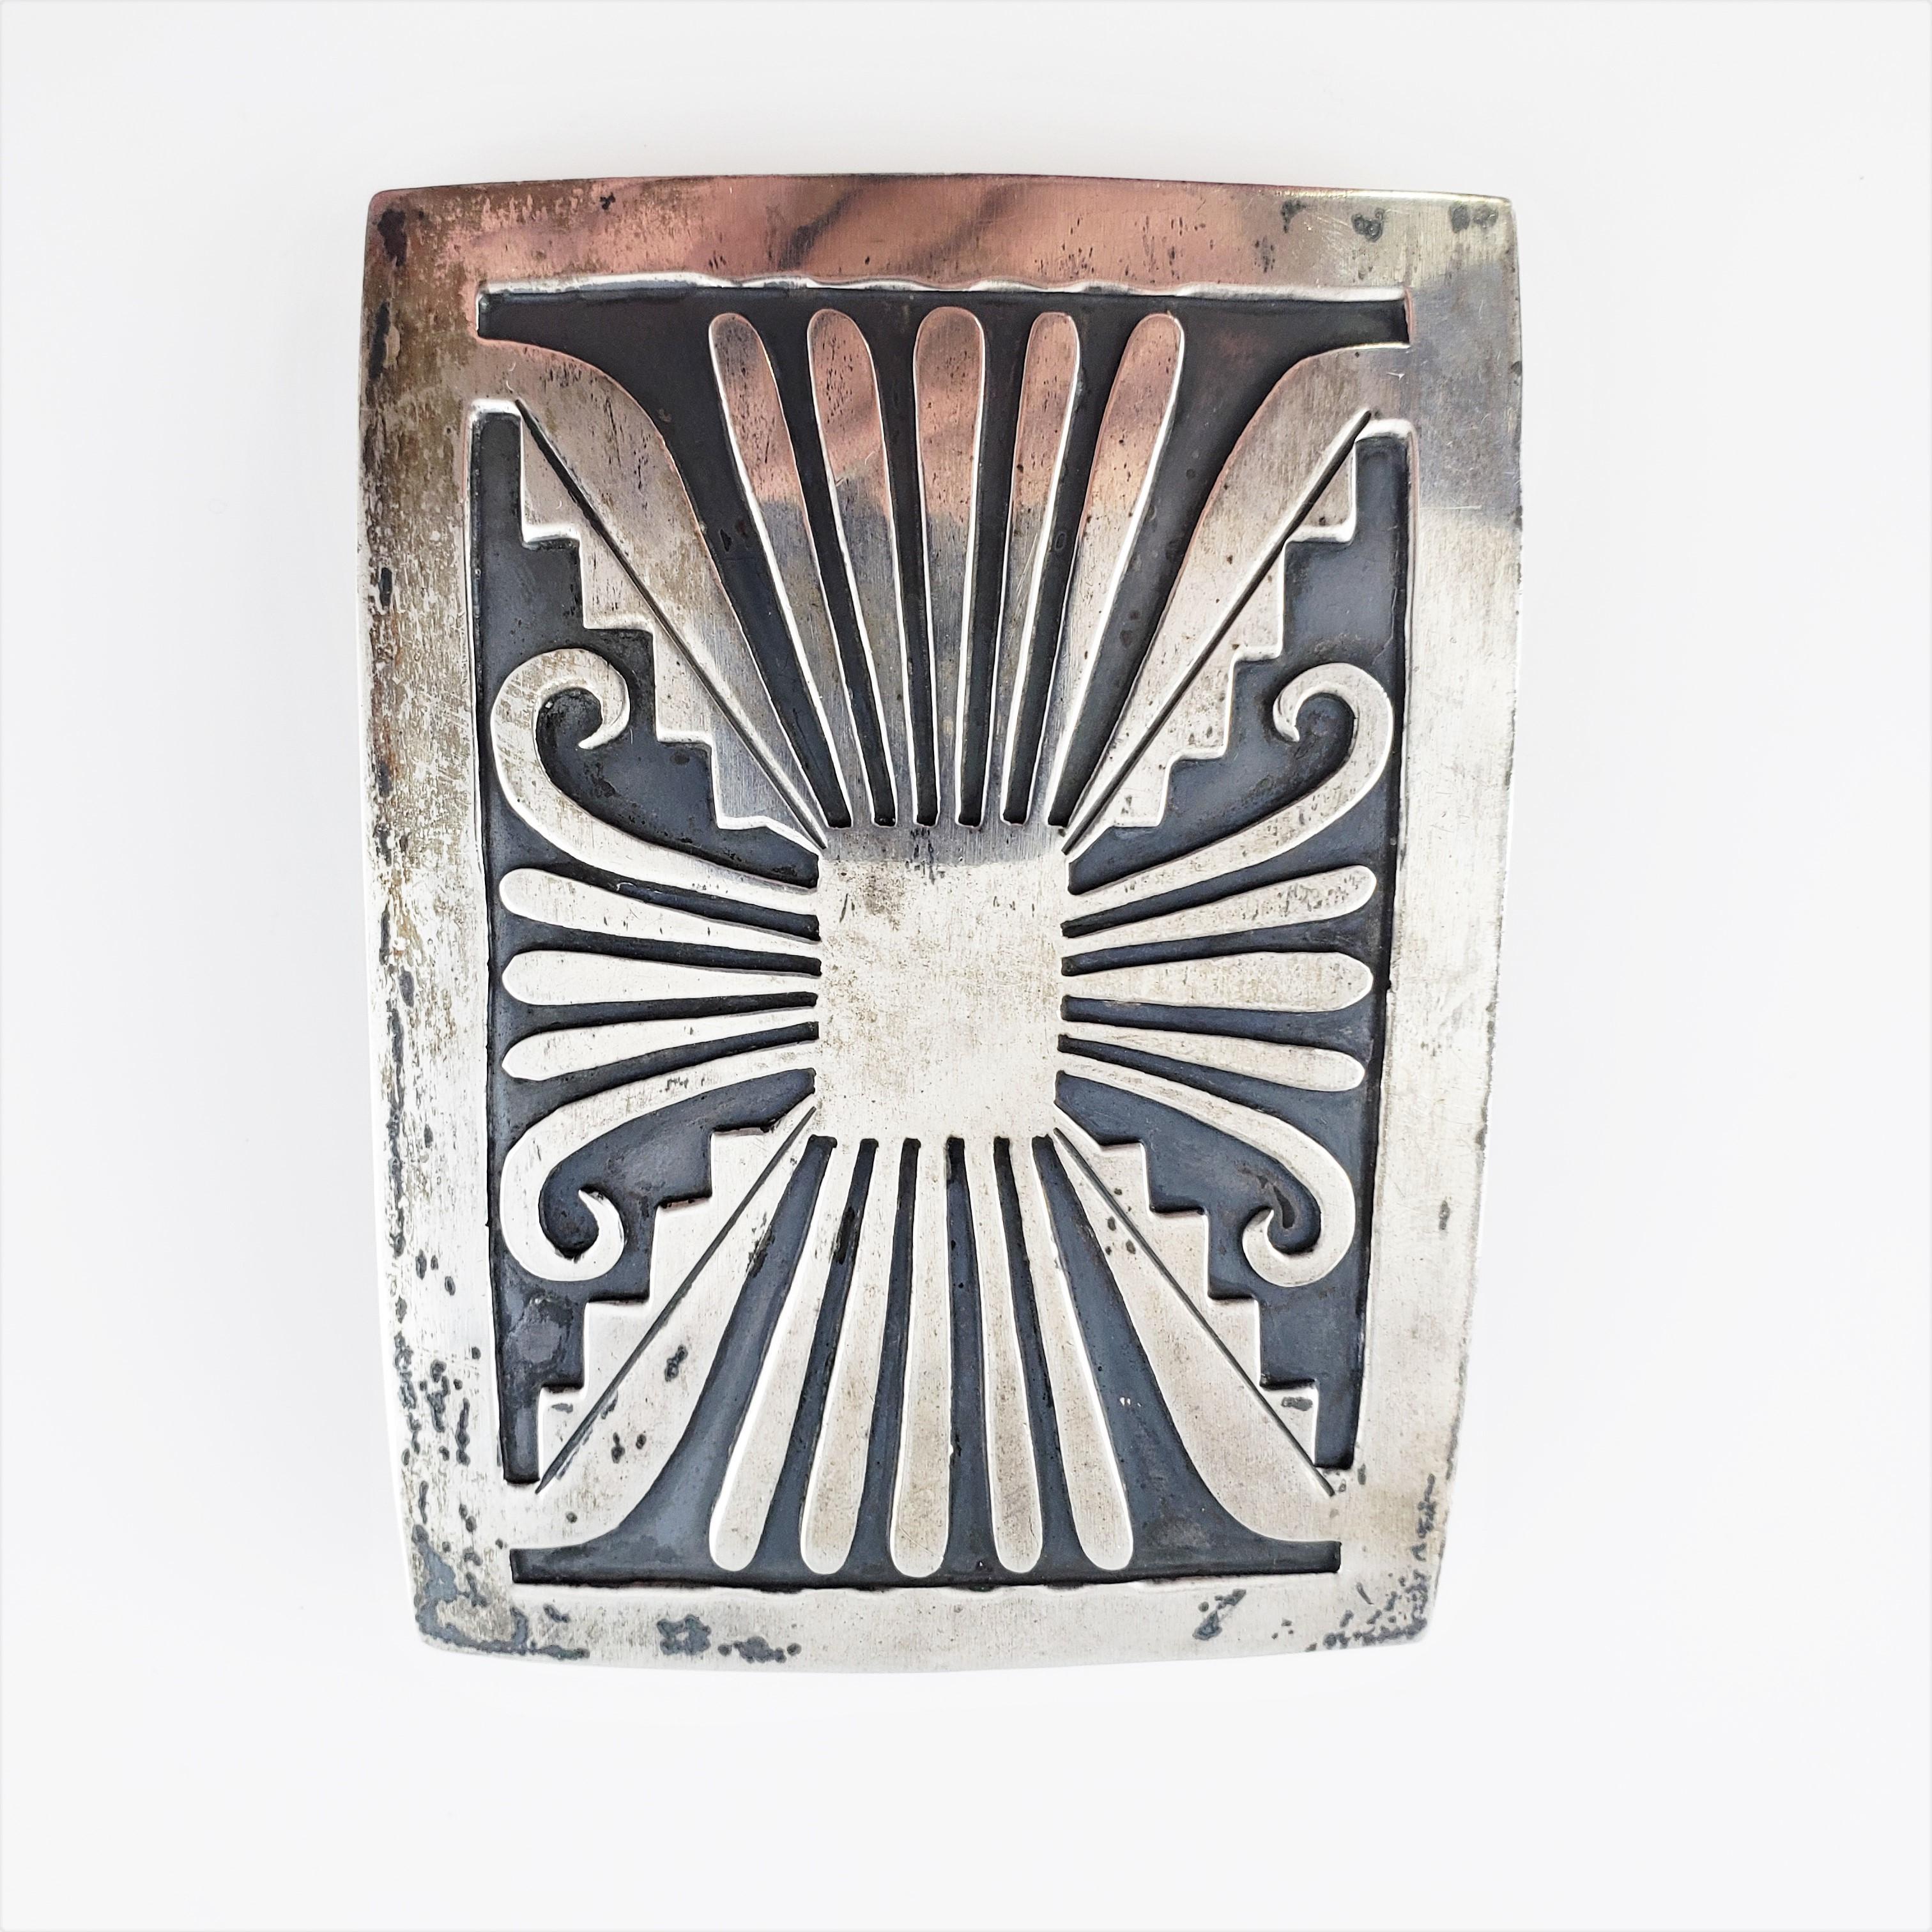 Vintage Native American Silver Overlay Large Belt Buckle-

This beautifully detailed belt buckle features a lovely overlay design.

Belt Opening: 2 1/8 inches

Size: 3 7/8 inches x 2 3/4 inches

Weight: 50.8 dwt./ 78 g.

Silver purity unknown.